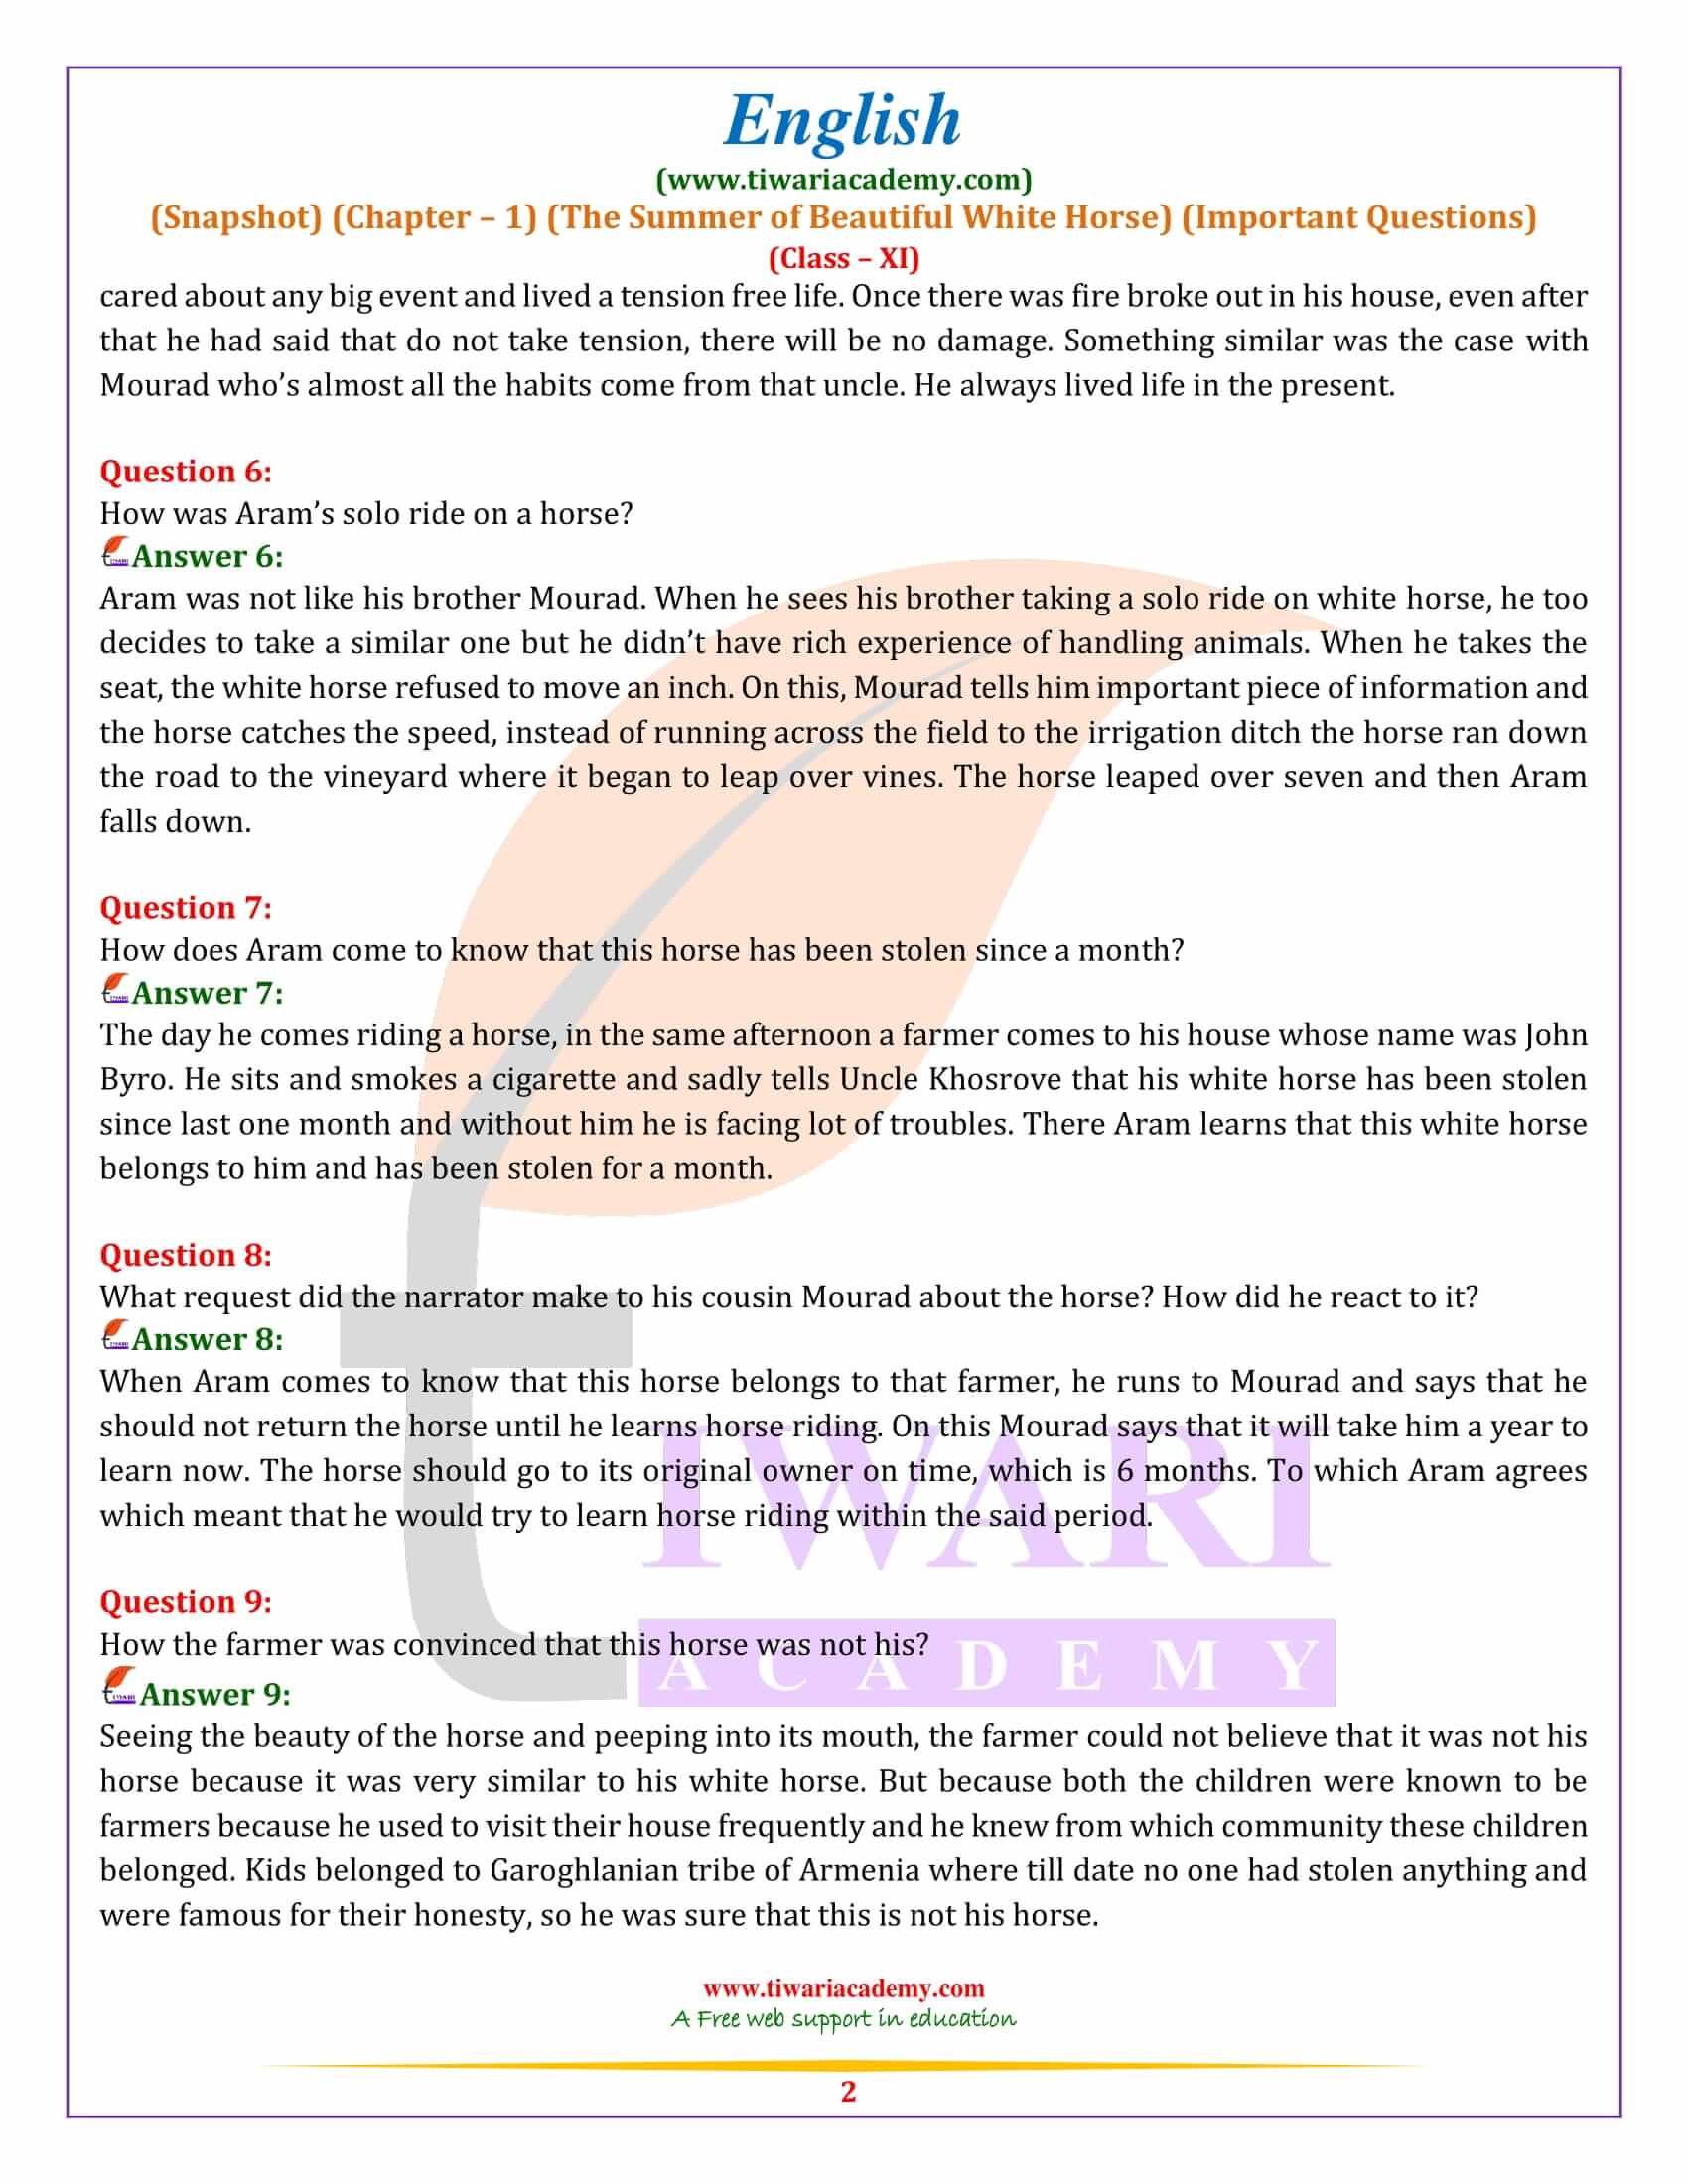 Class 11 English Snapshots Chapter 1 Extra Questions